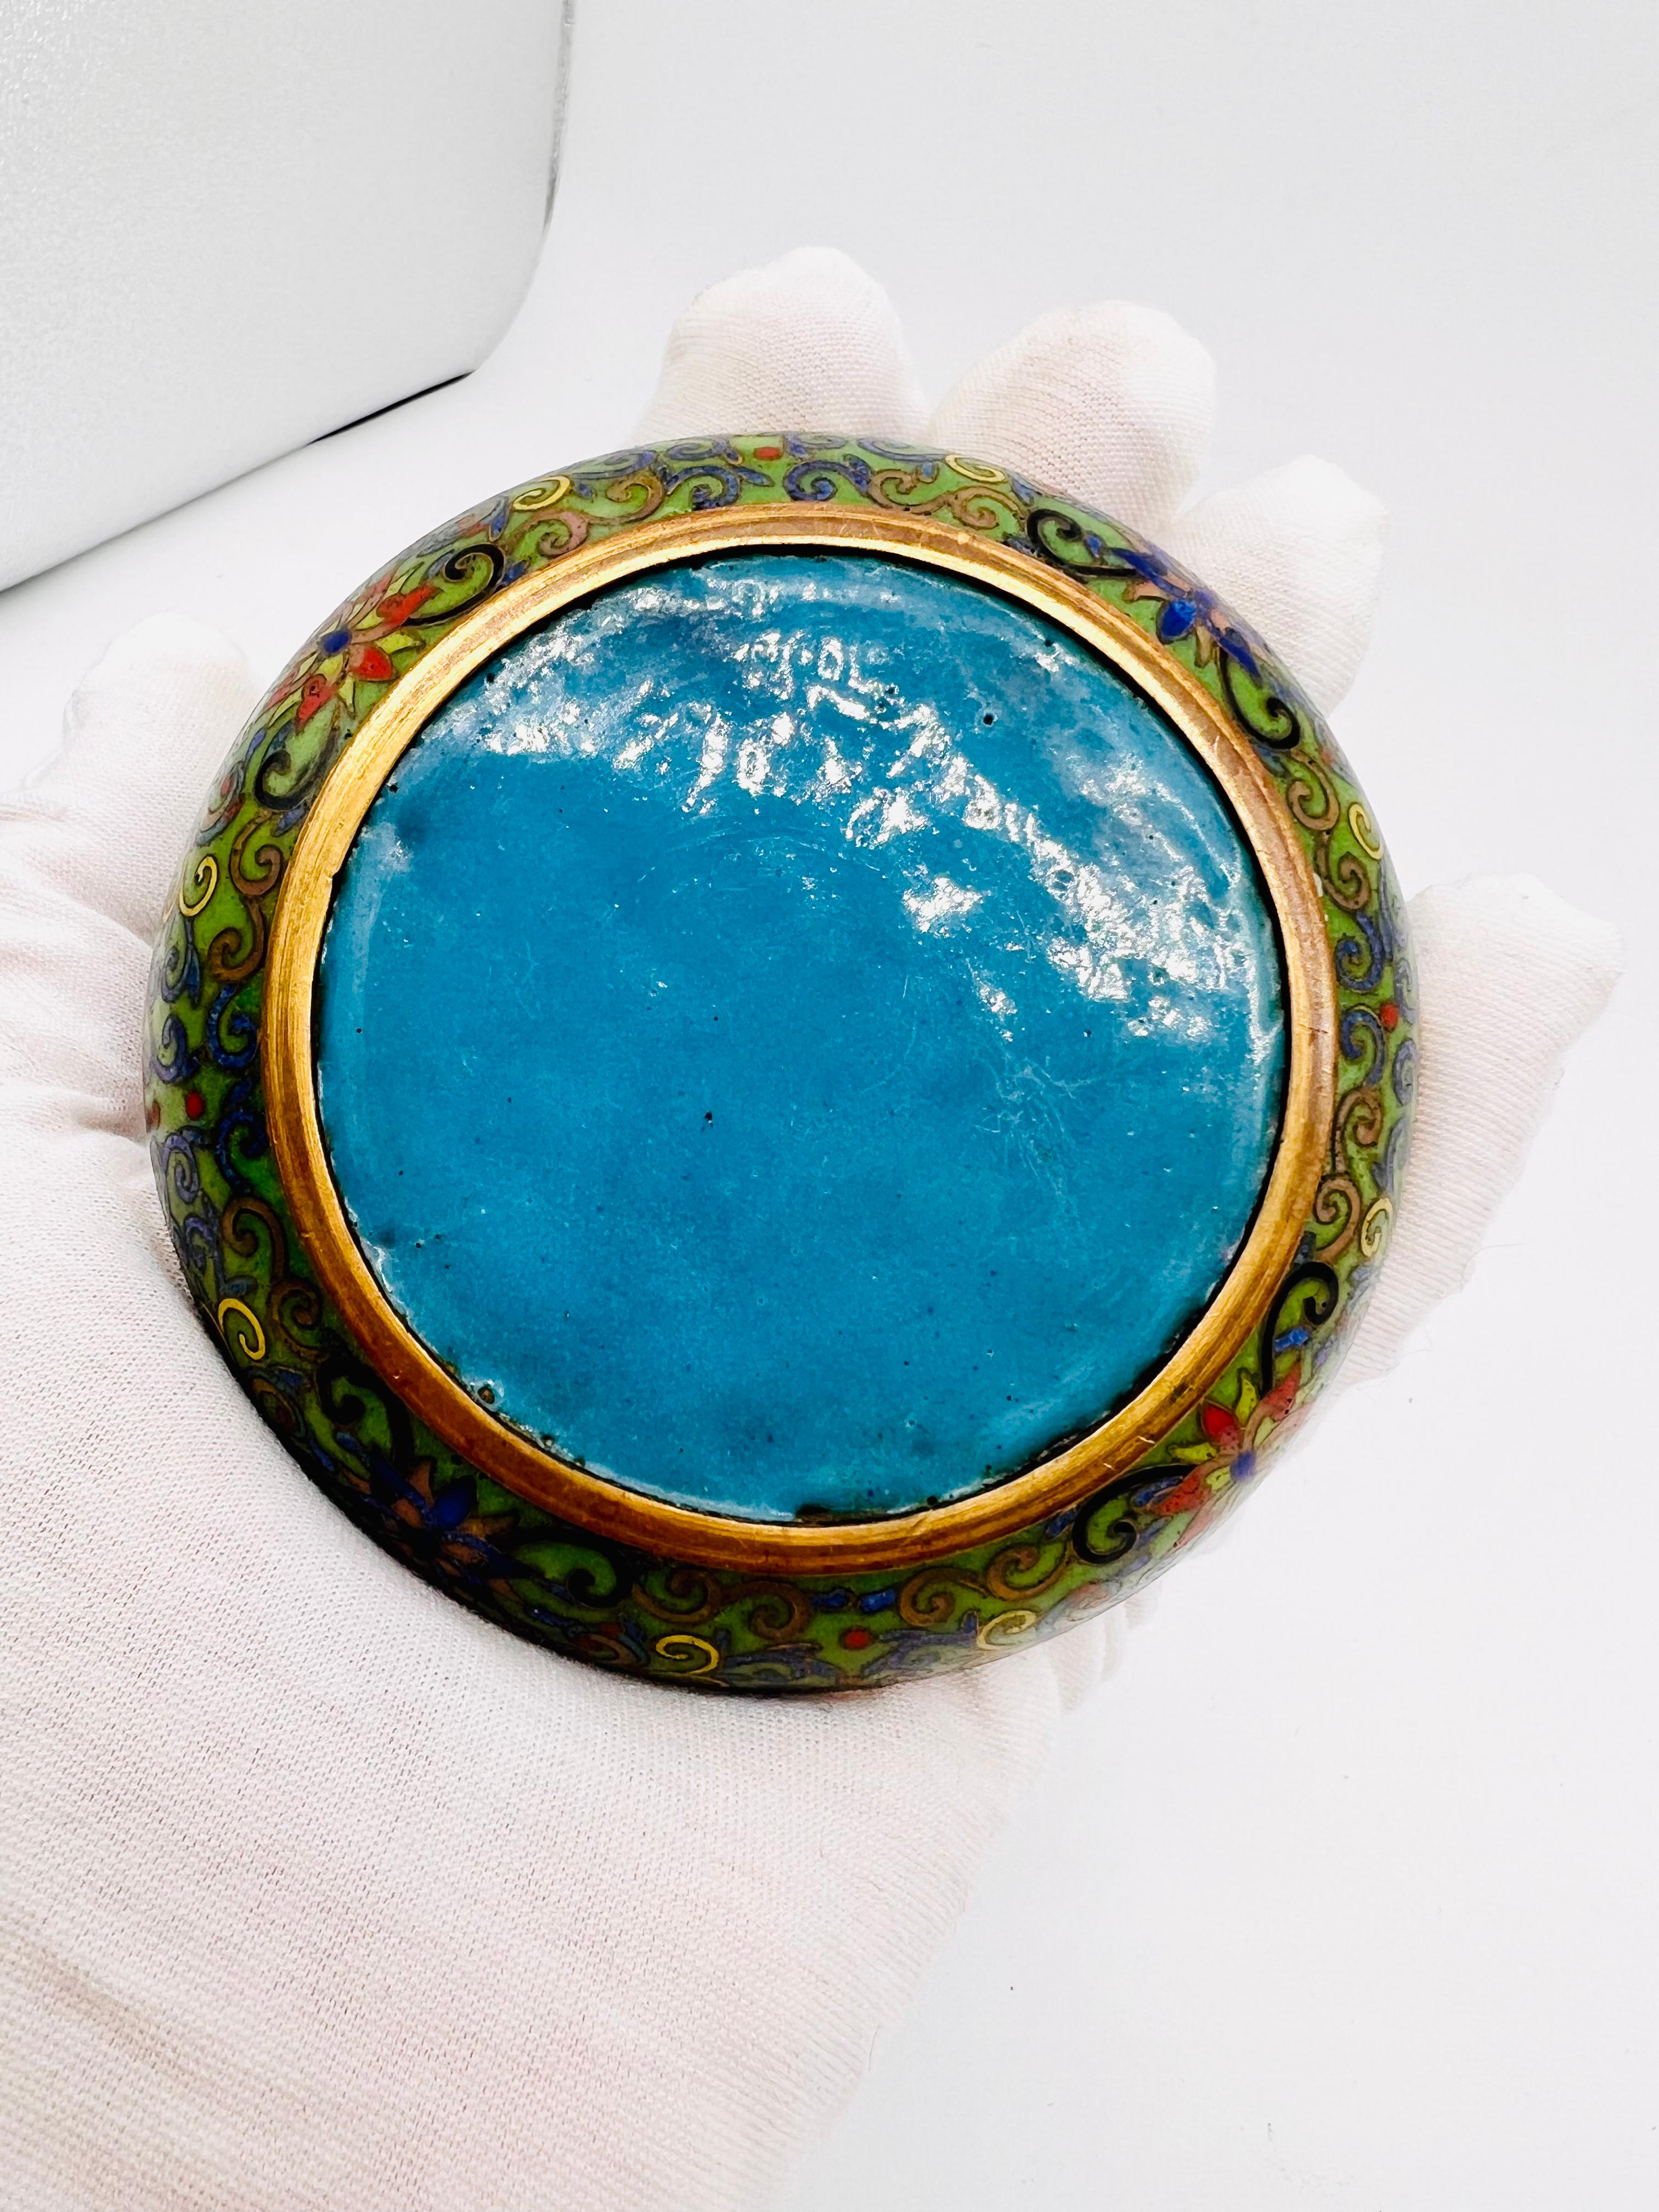 Fine Chinese Cloisonne Enamel Plate / Dish / Tray, 19th Century For Sale 9